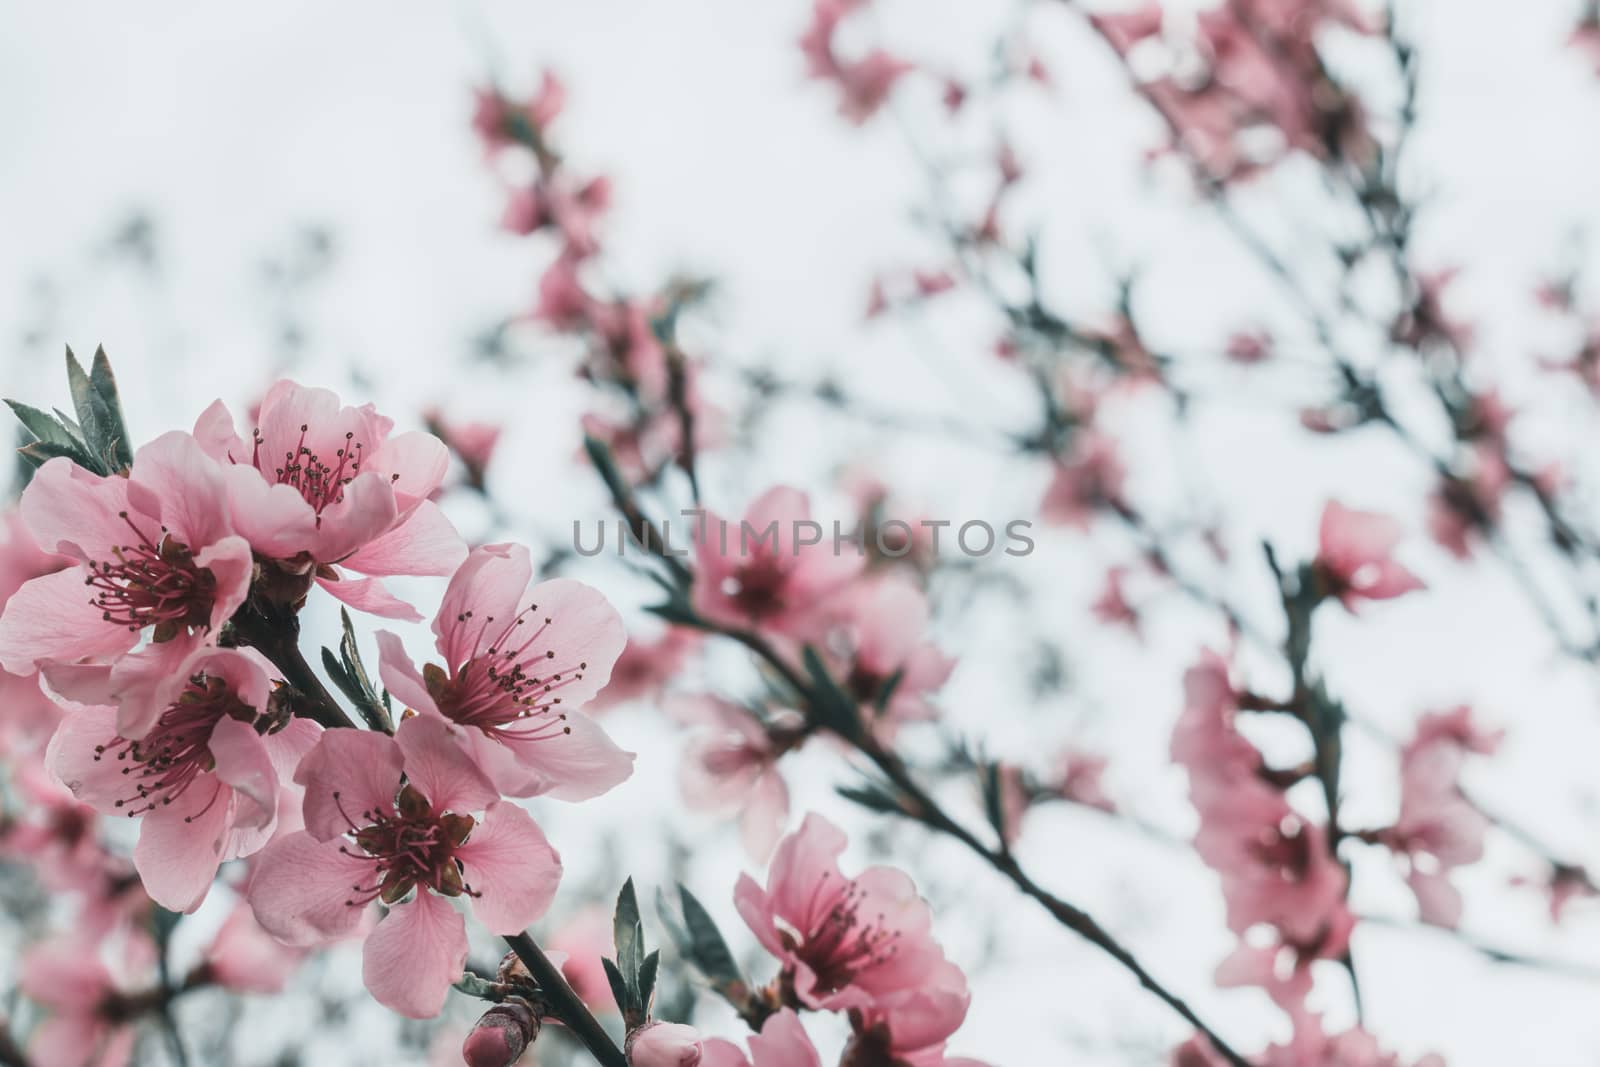 Blooming fruit tree close up. by GraffiTimi